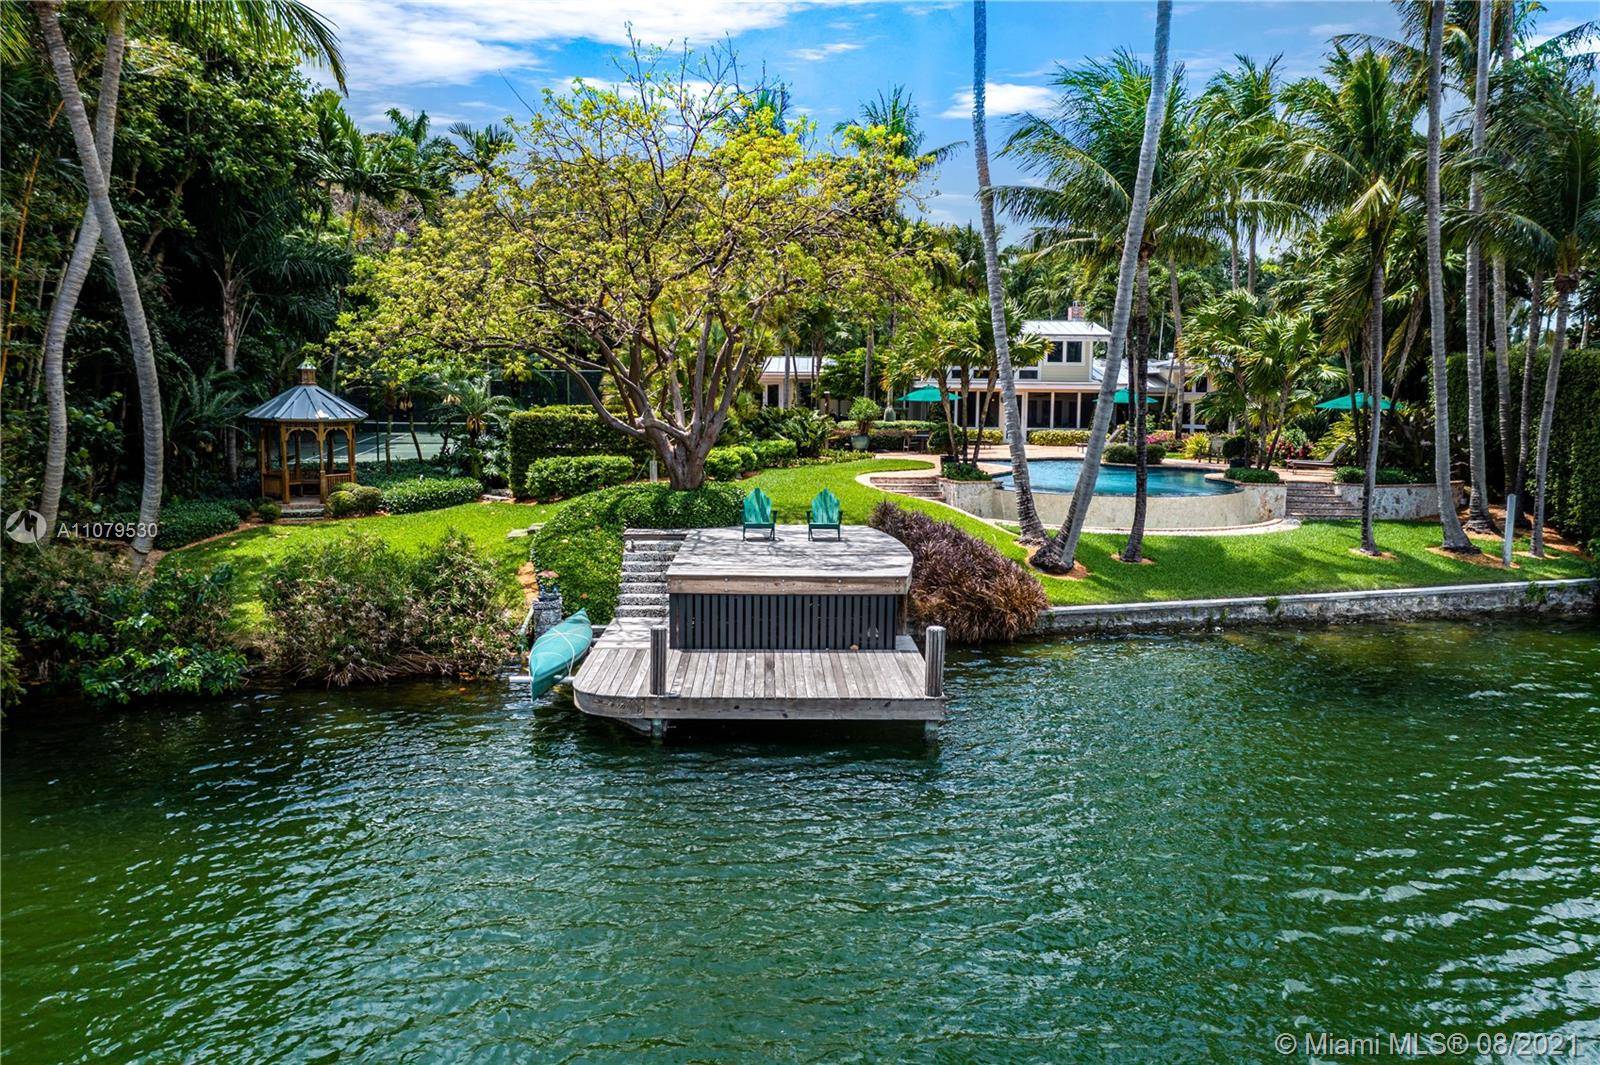 Situated in Hammock Lakes, one of the most desirable gated communities in Coral Gables, this gorgeous 6, 427 Sq.